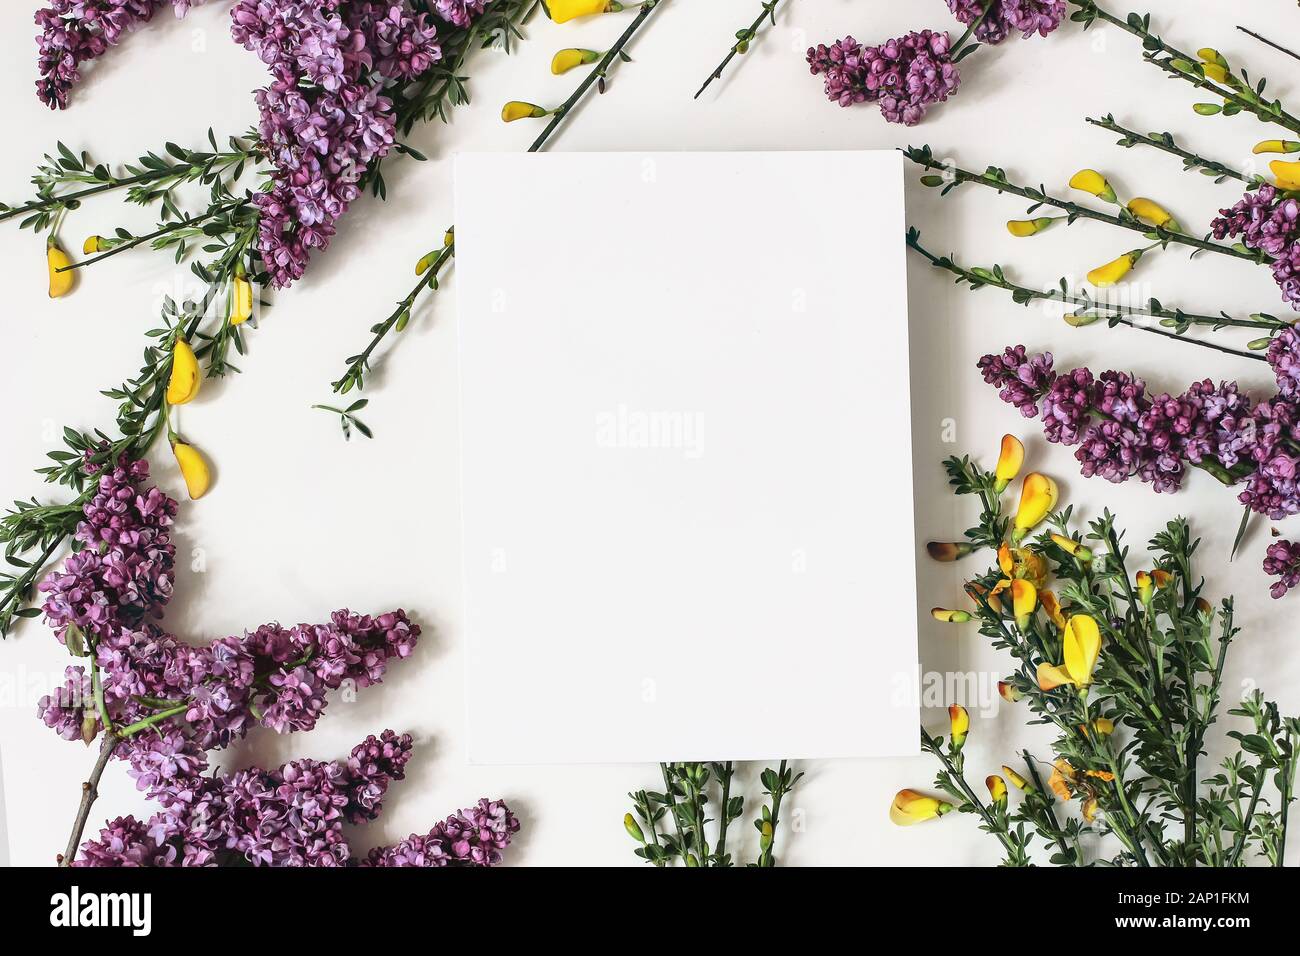 Spring botanical floral composition. Greeting card mockups scene. Decorative frame, banner made of purple lilac, yellow broom Cytisus flowers and bran Stock Photo